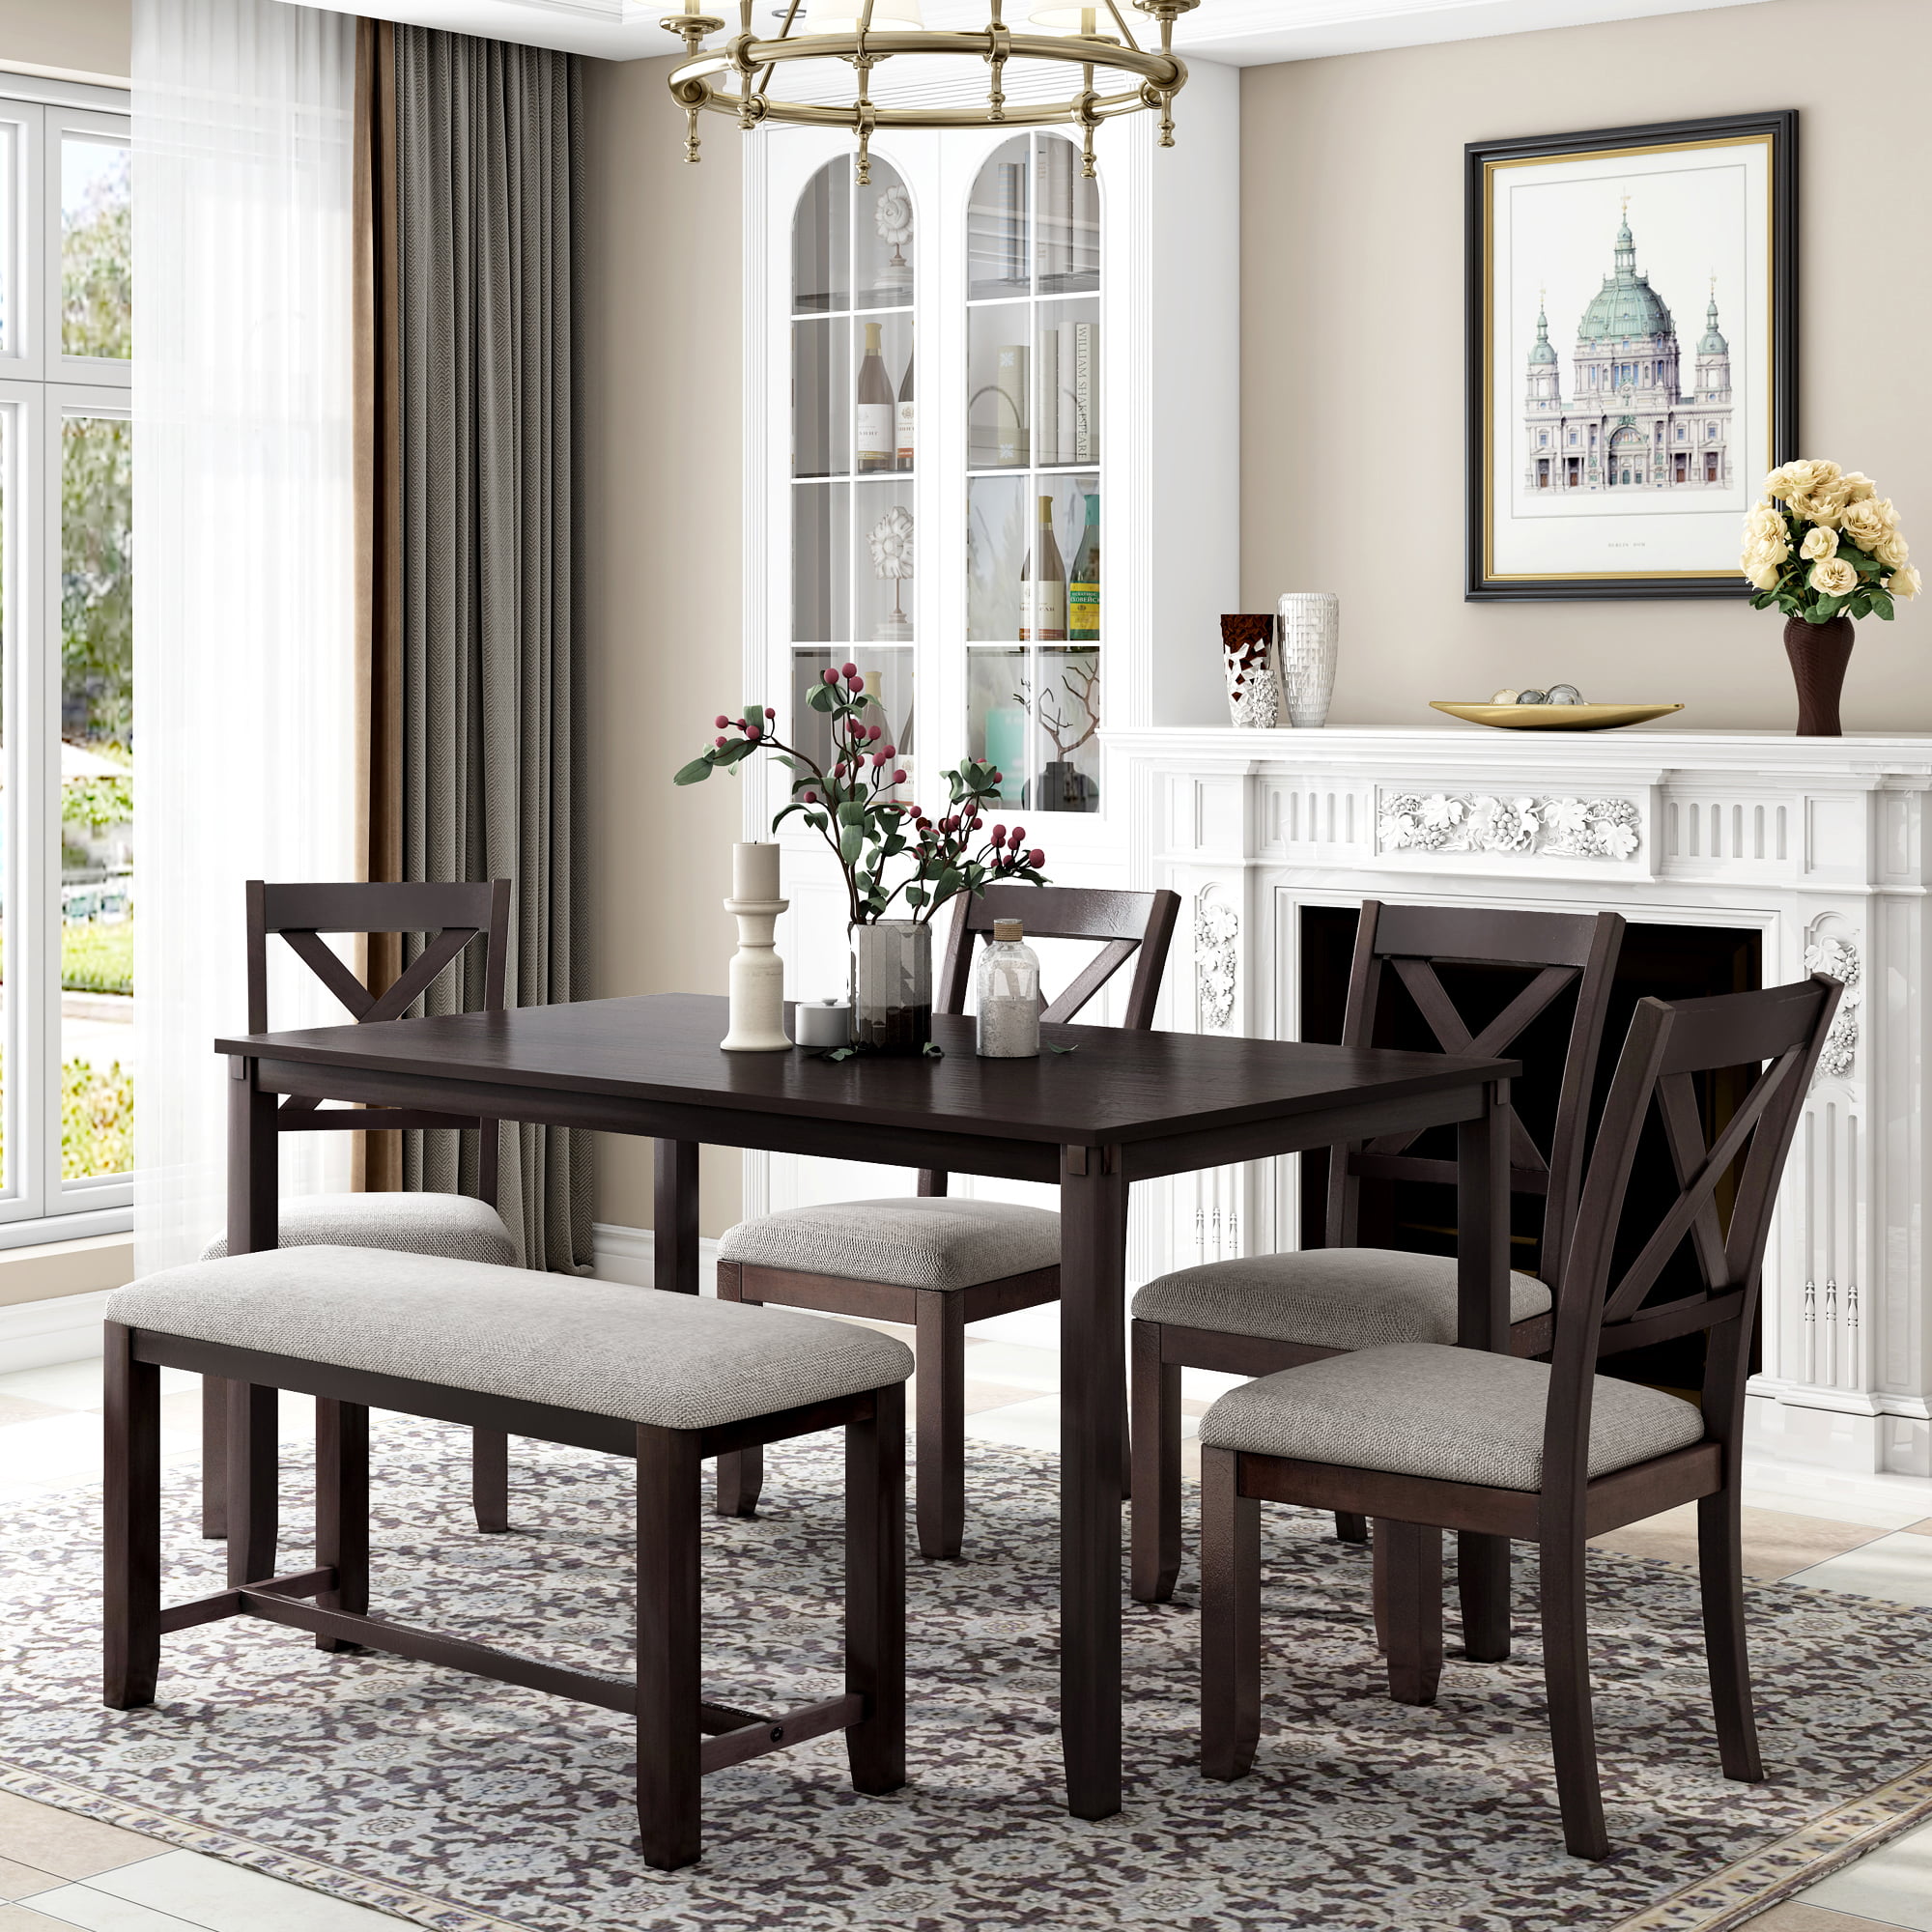 Wood Dining Table And Chair Set Of 6, Tufted Dining Room Set With Bench